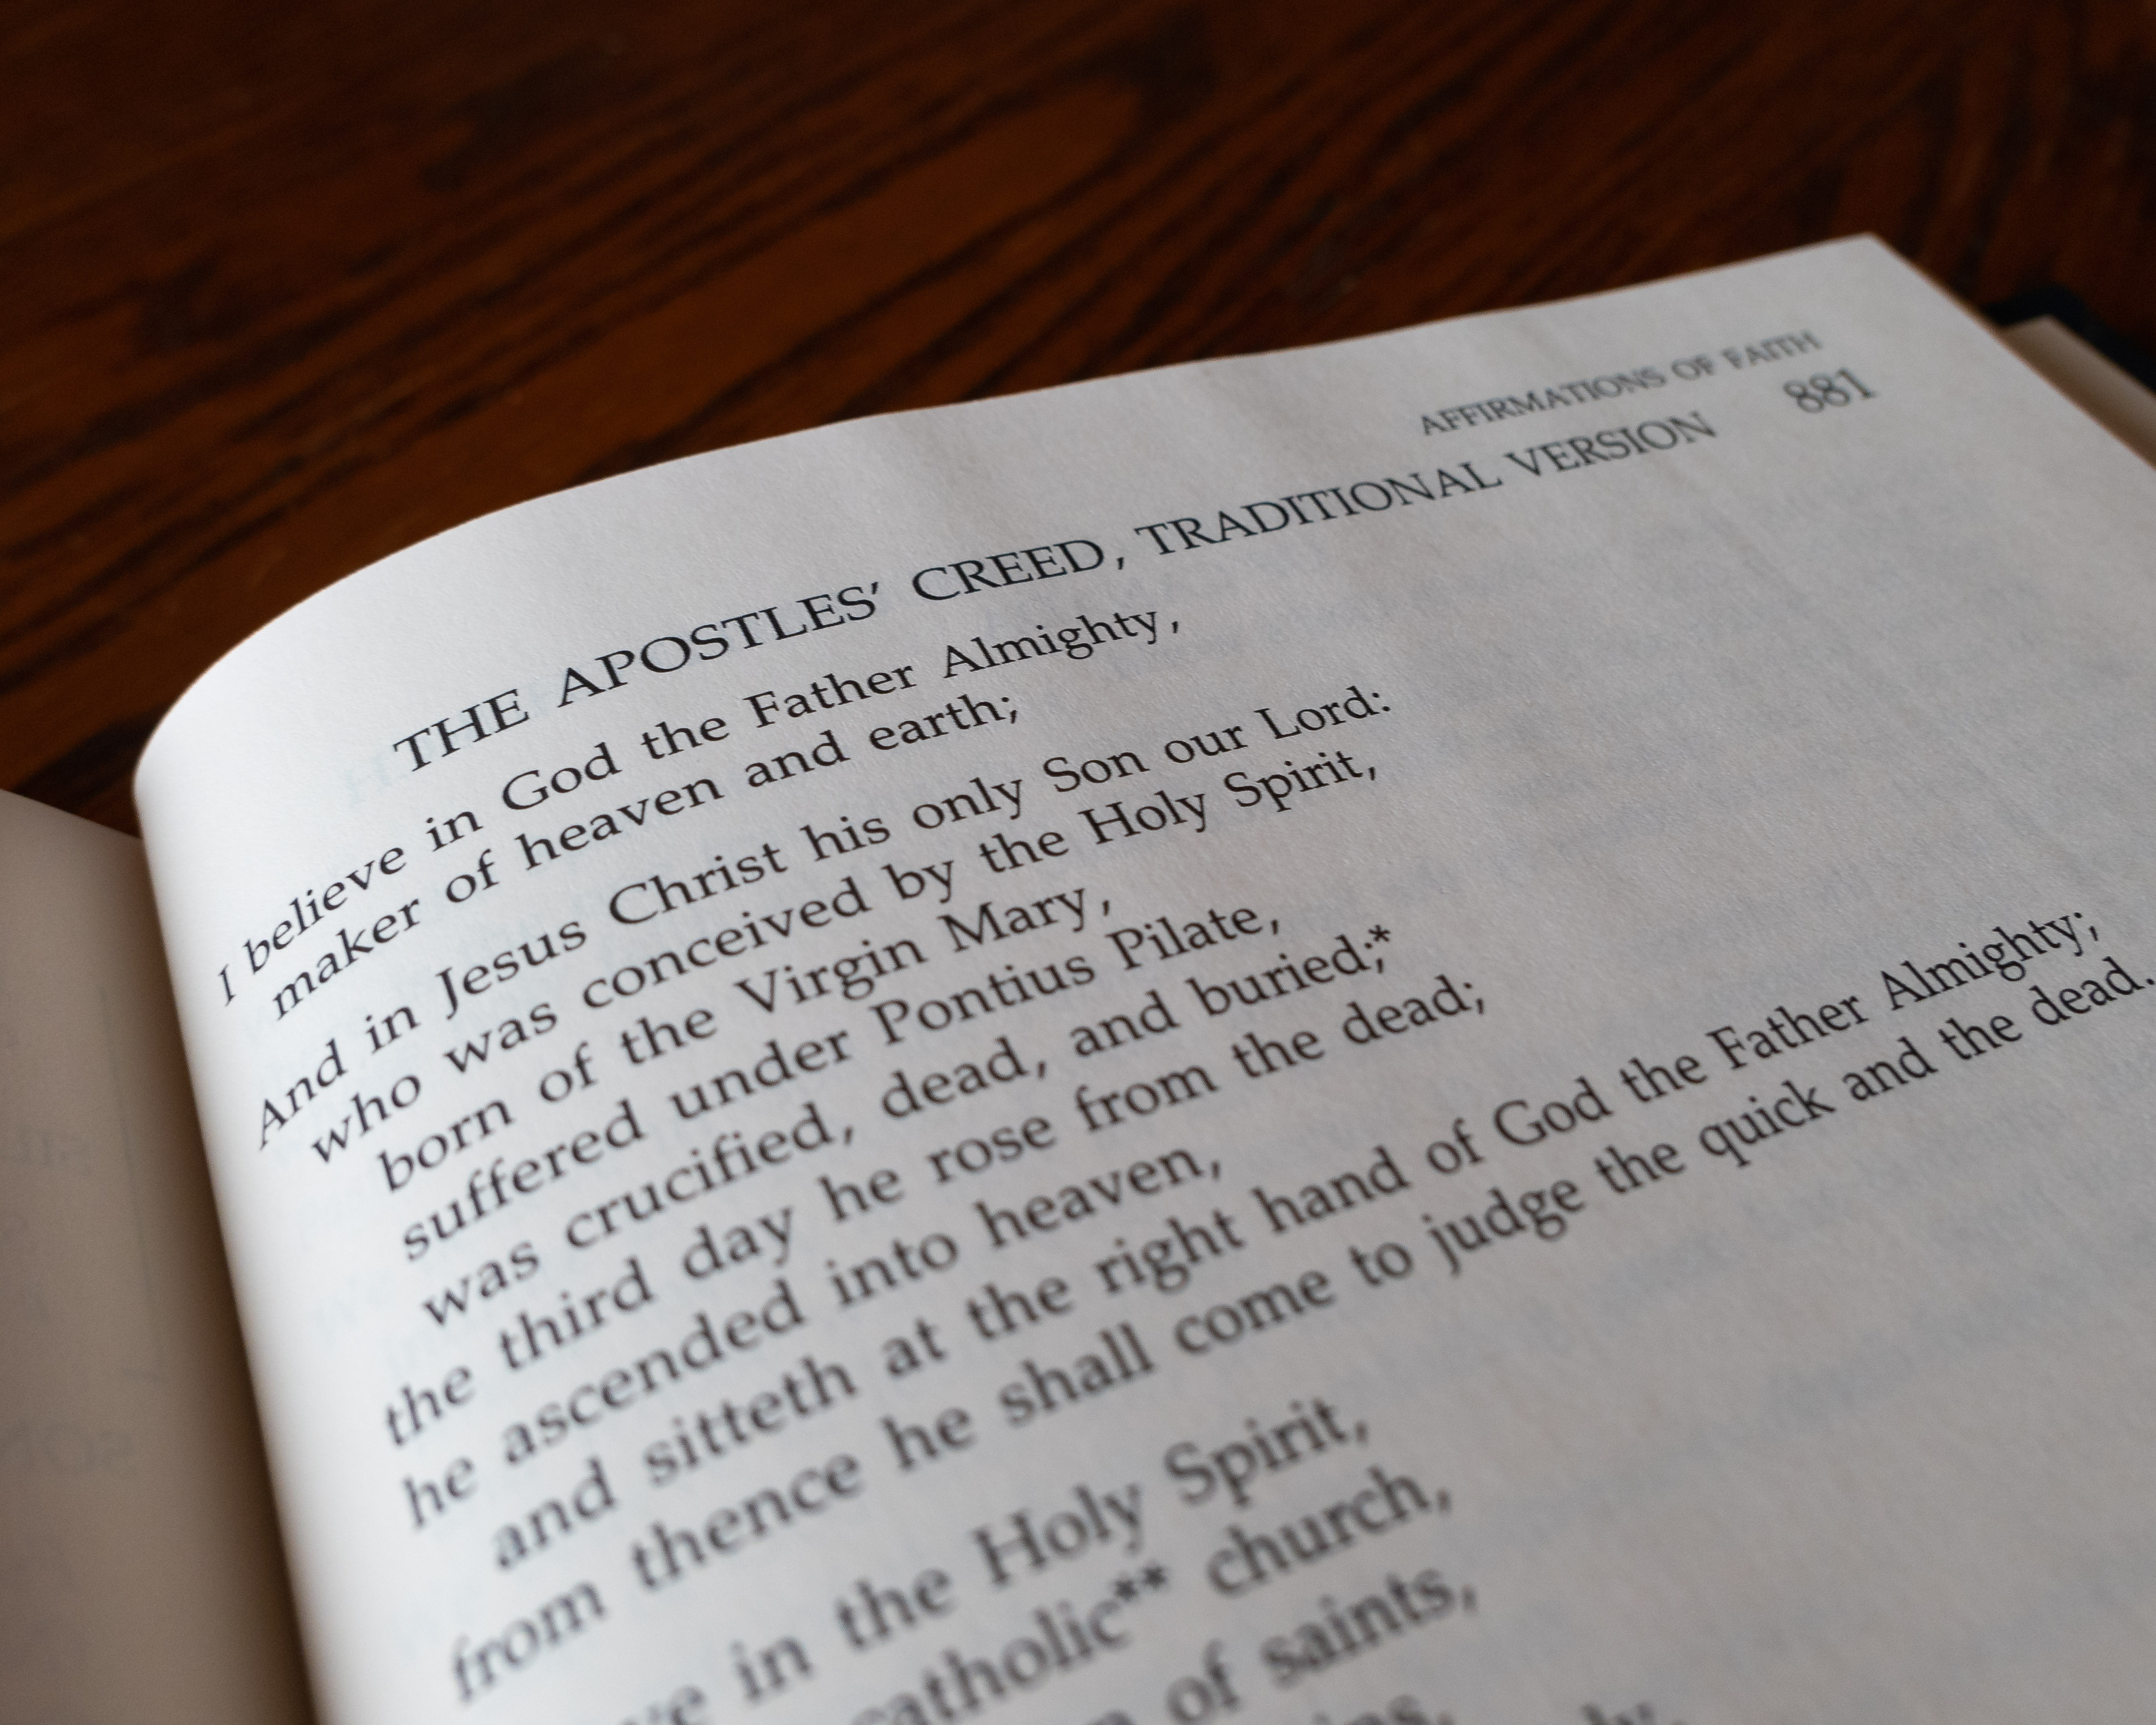 The Apostle’s Creed: The Communion of Saints